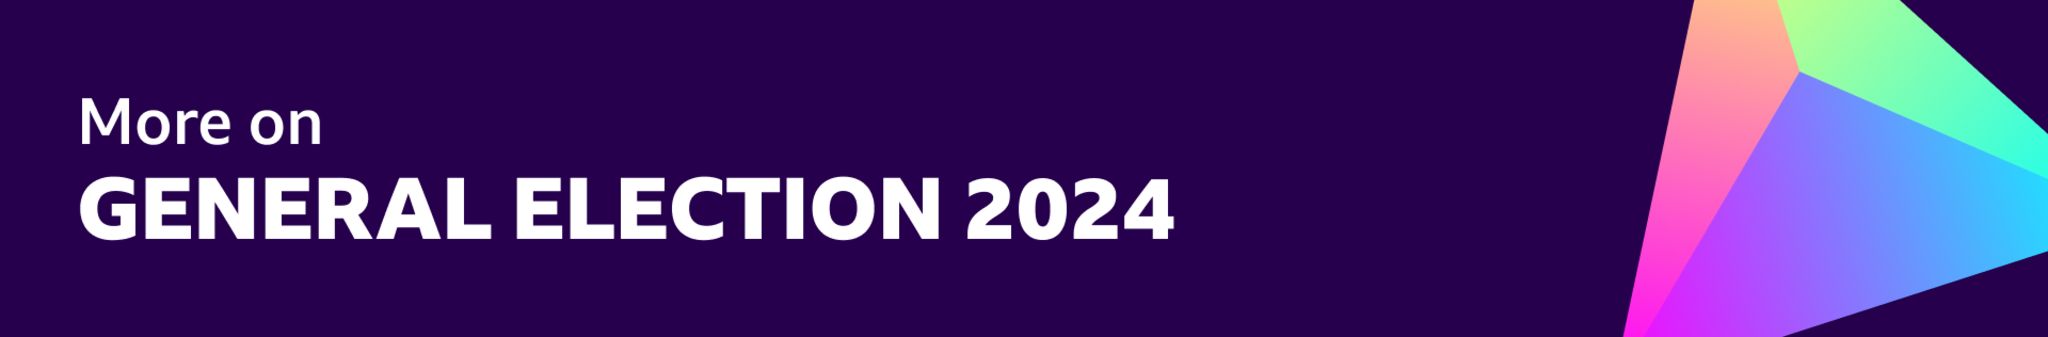 General election 2024 